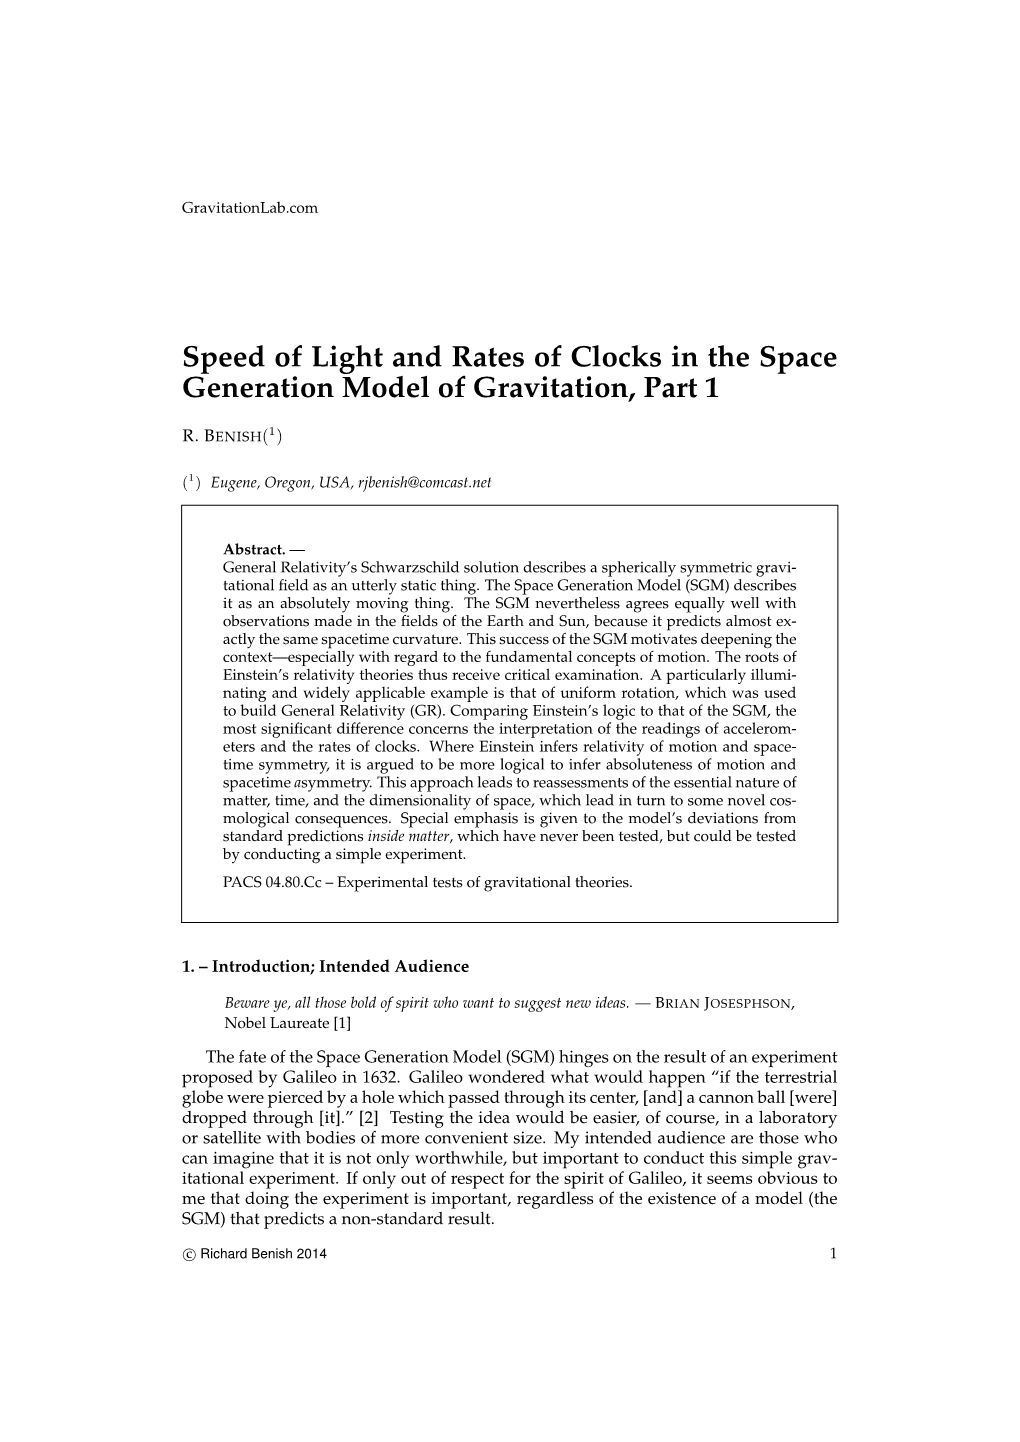 Speed of Light and Rates of Clocks in the Space Generation Model of Gravitation, Part 1